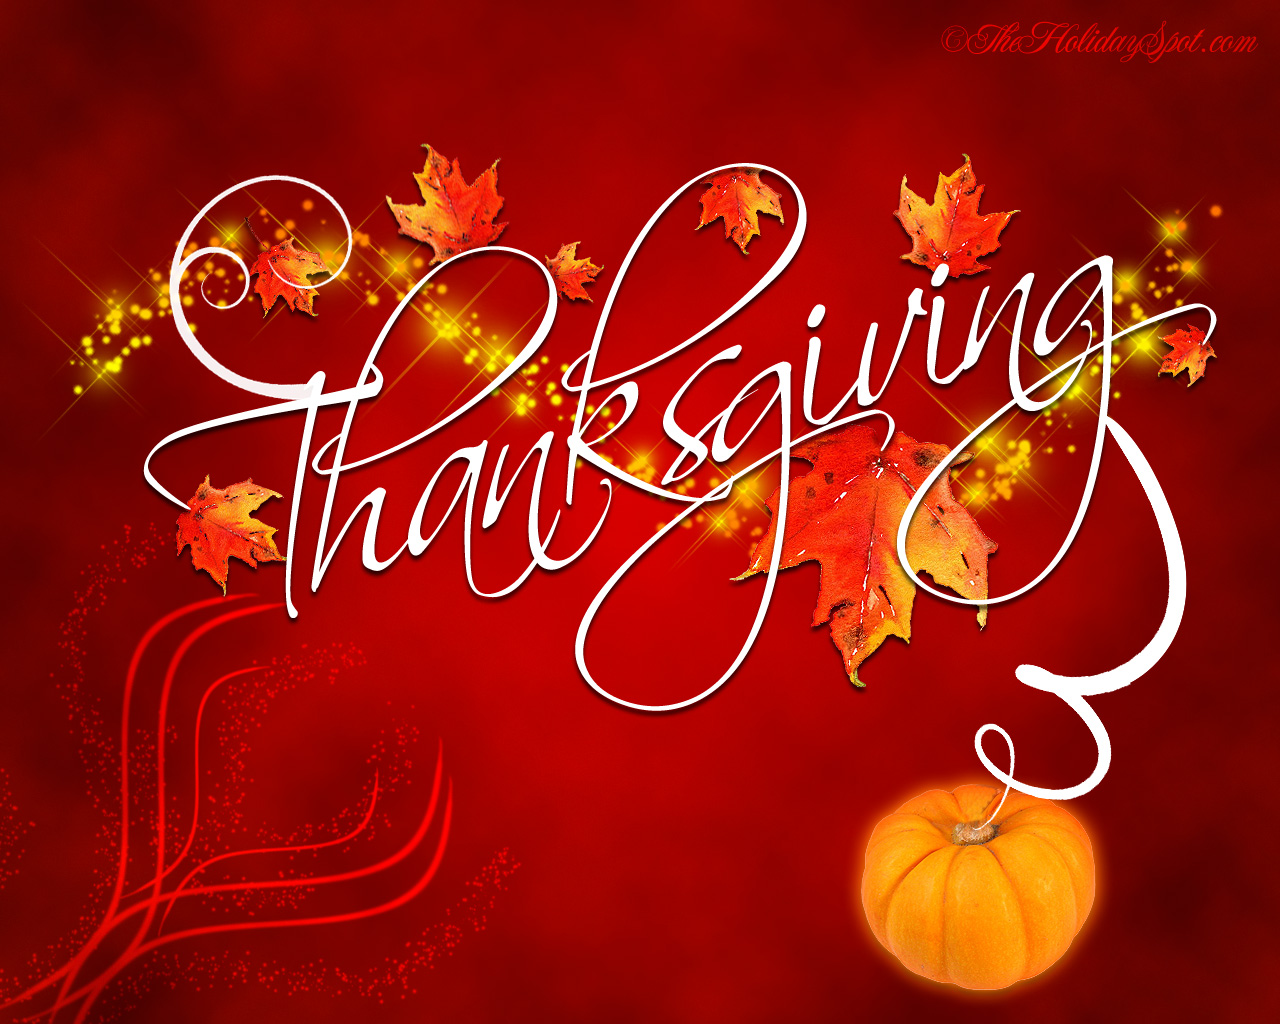 http://www.theholidayspot.com/thanksgiving/wallpapers/new_images/thanksgiving-day-wallpaper.jpg